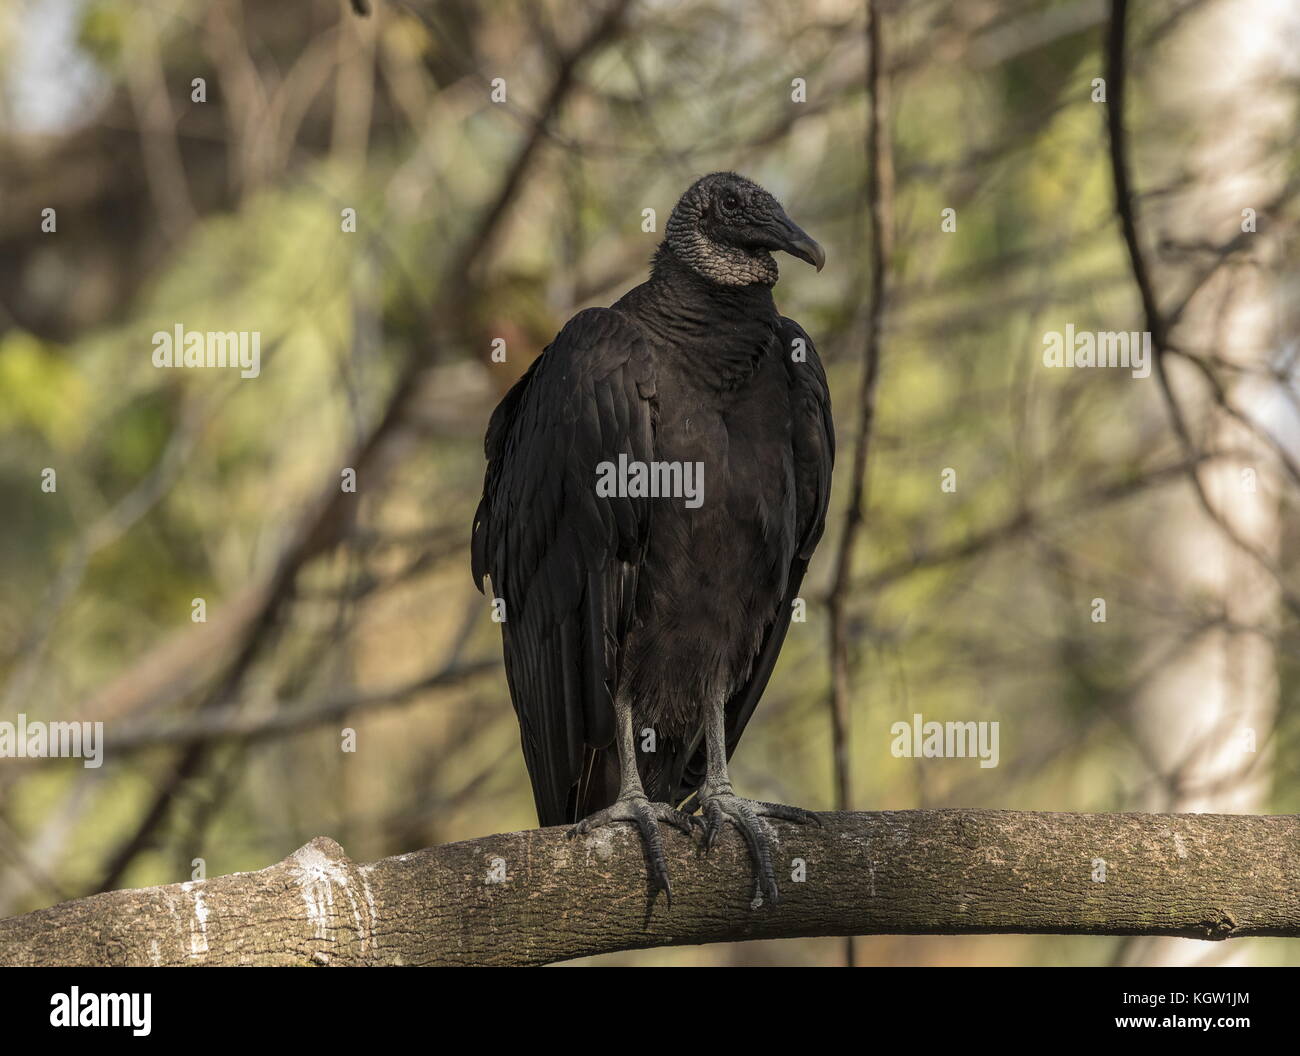 vulture, New World Vulture, Cathartidae Stock Photo